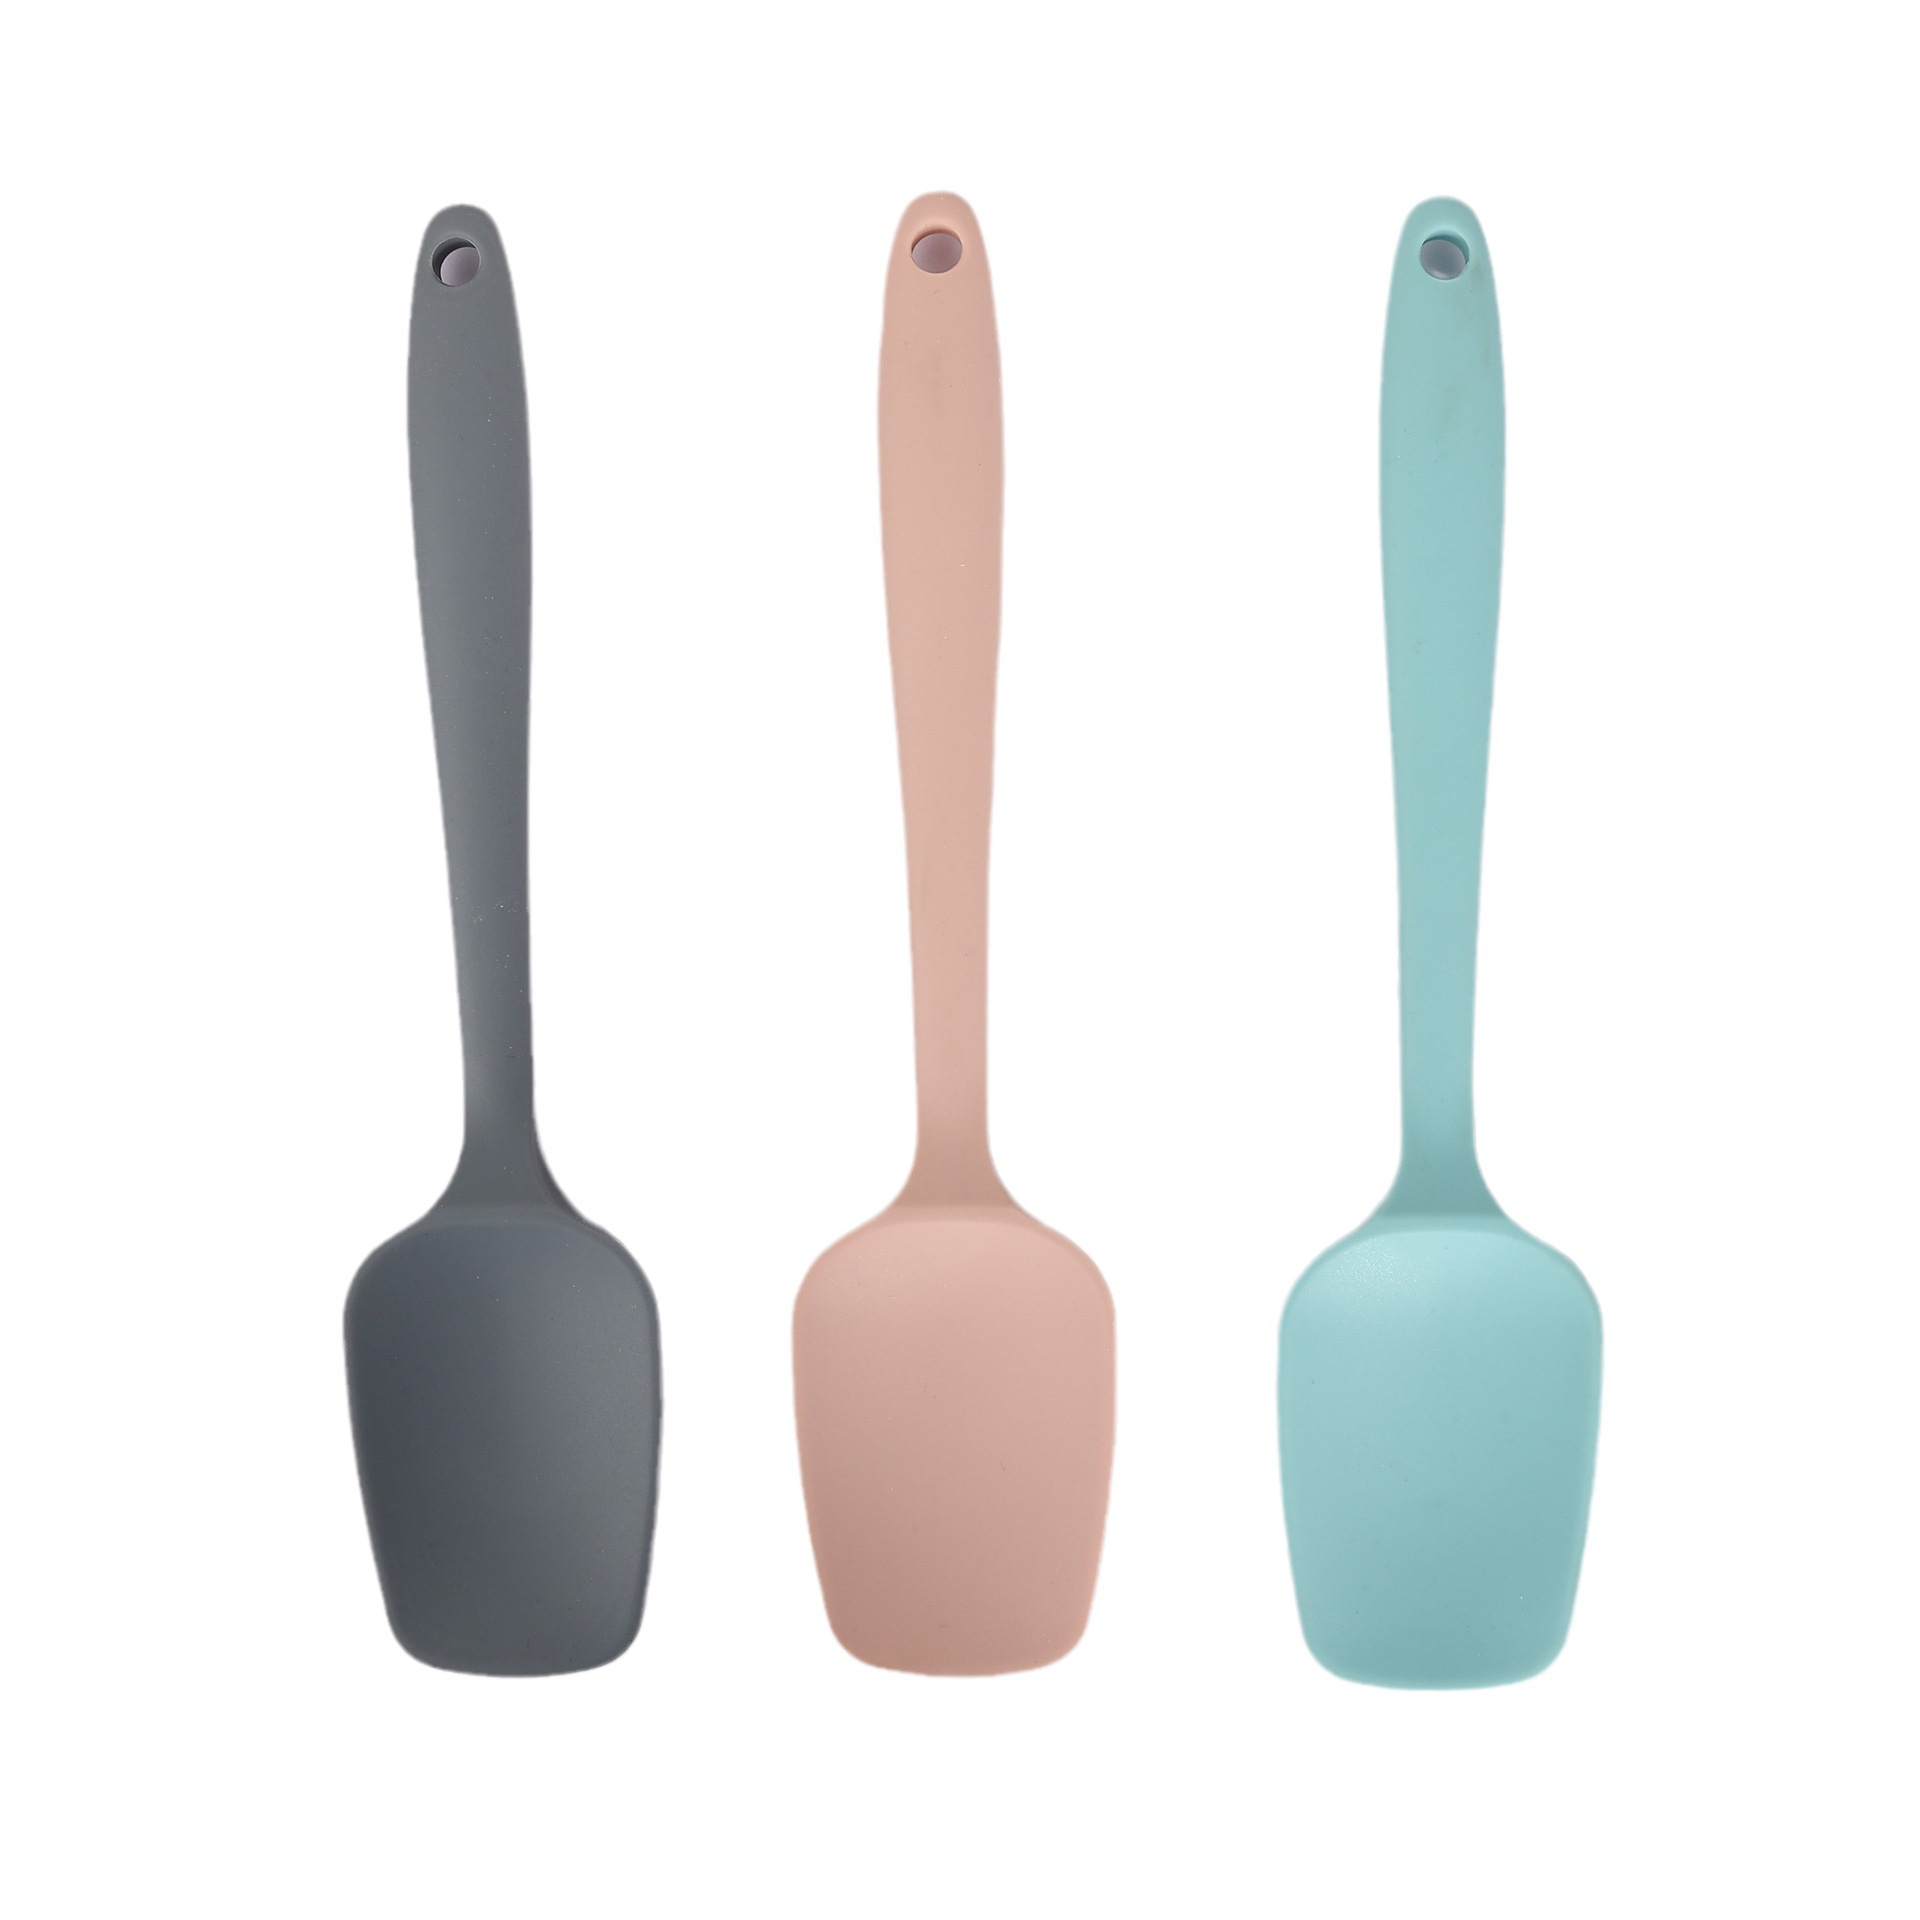 Factory Direct Sales Integrated Silicone Kitchenware Kitchen Cap Spatula and Soup Spoon Multi-Functional Cooking Kitchen Silicone Spoon Set New